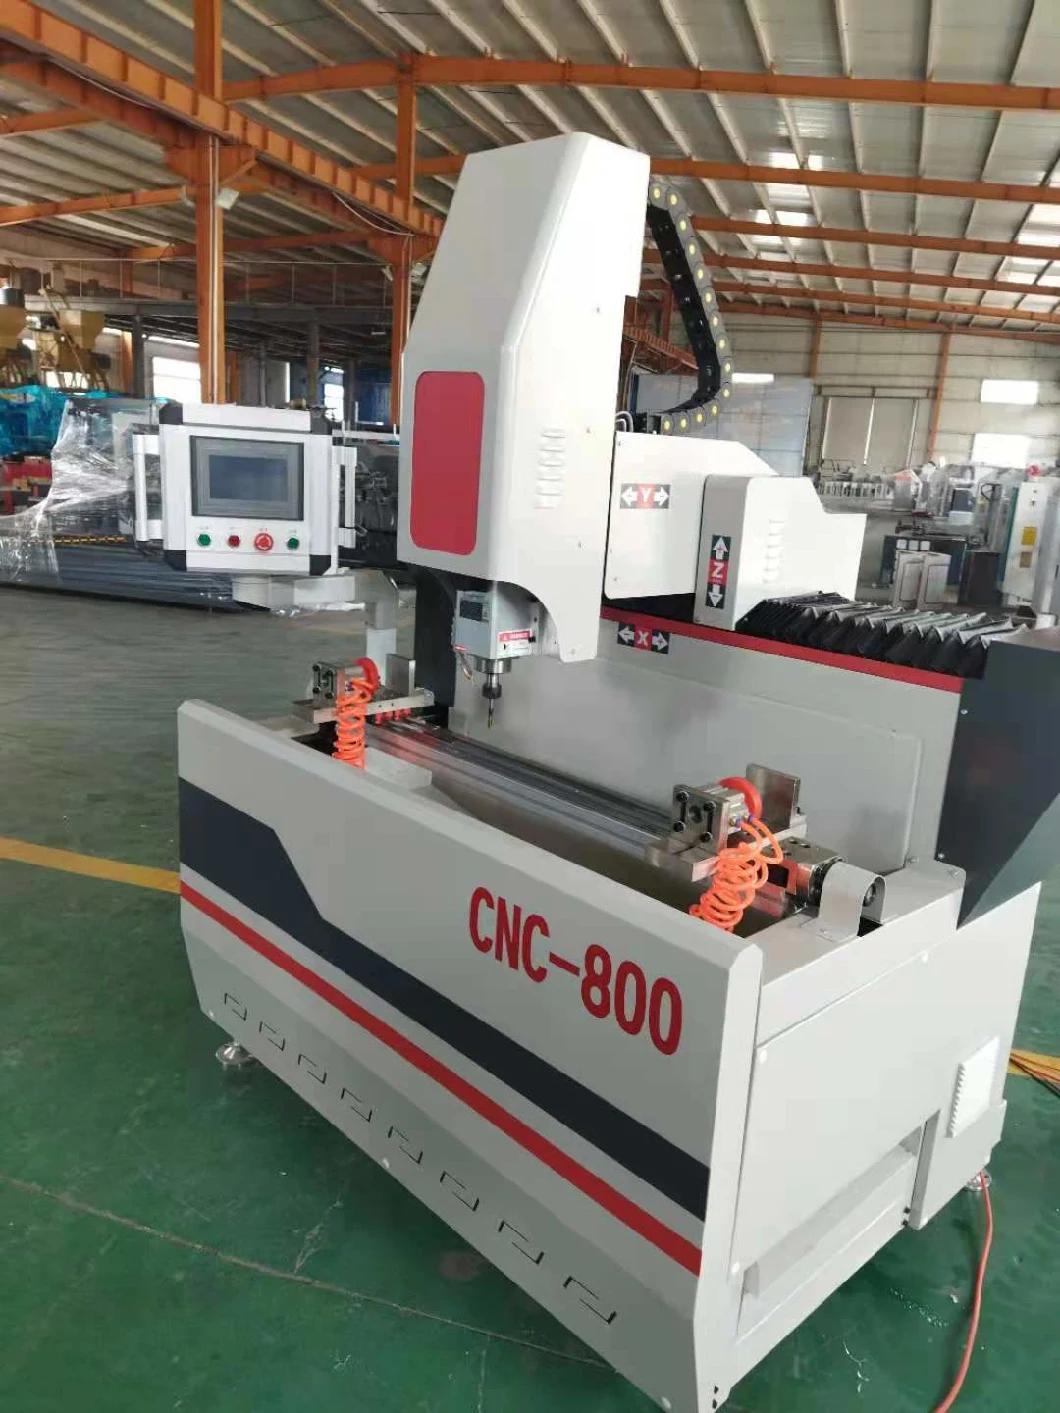 Lxf-CNC-800 CNC Drilling and Milling Machine for The Processing of Key Holes of Industrial Aluminum Alloy Profiles for Doors and Windows Making